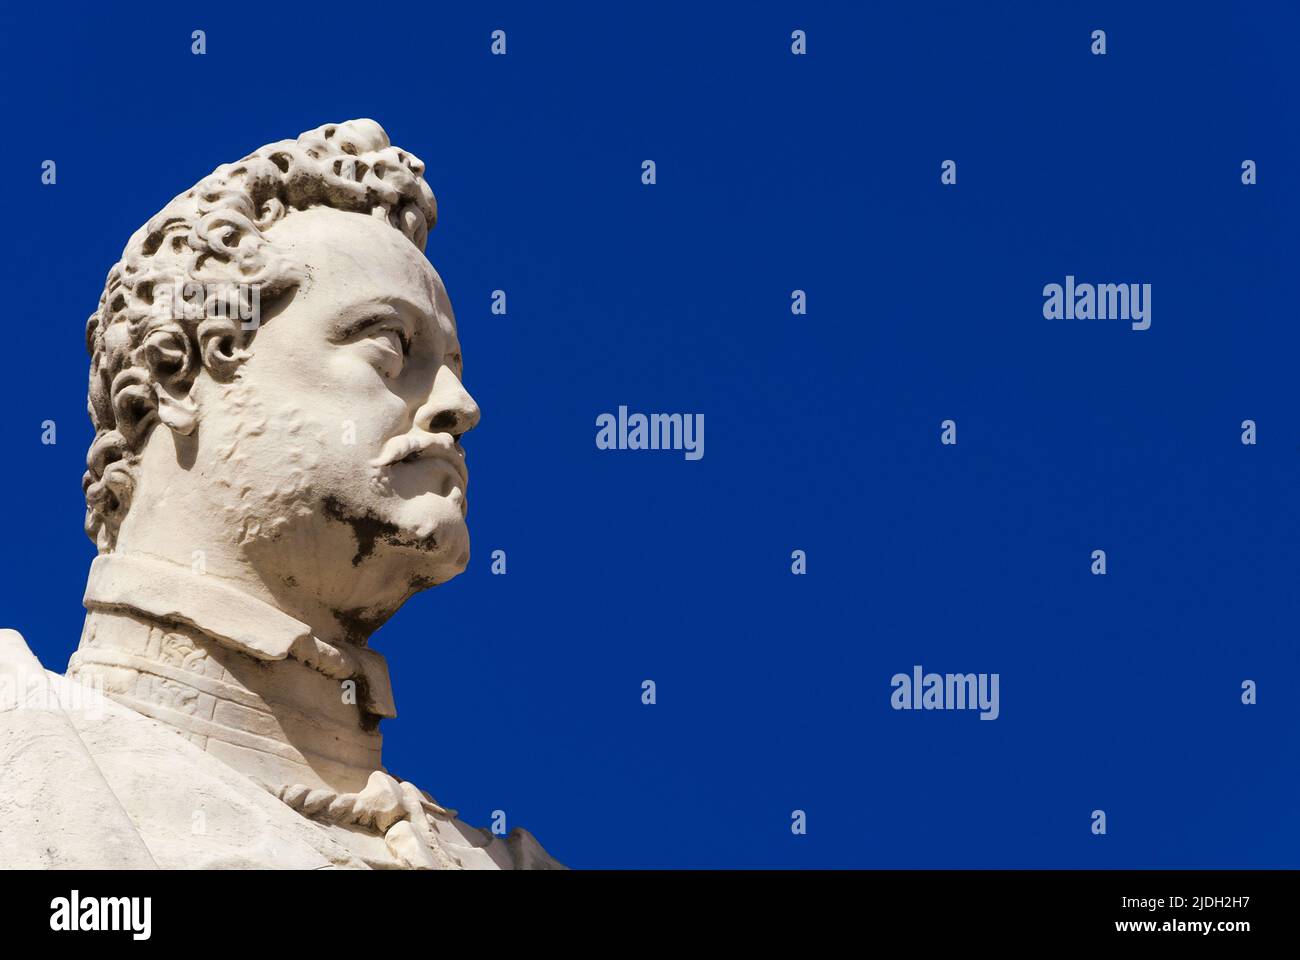 Ferdinando I Medici, Grand Duke of Tuscany. A marble statue erected in 1594 in the historical center of Pisa (with blue sky and copy space) Stock Photo